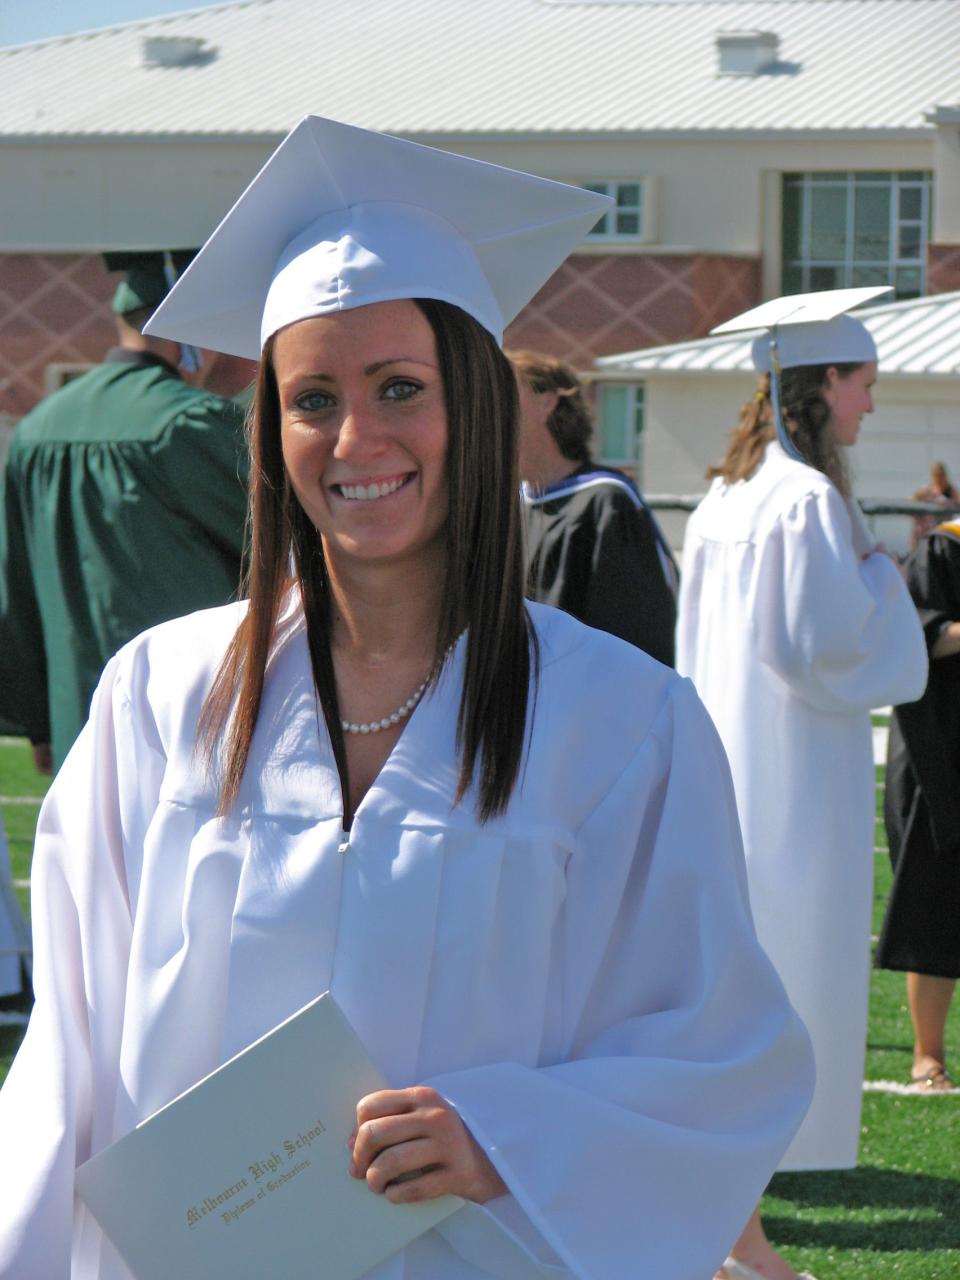 Korrianne Lundstrom was one of Dr. Gayden's patients. She graduated from Melbourne High School